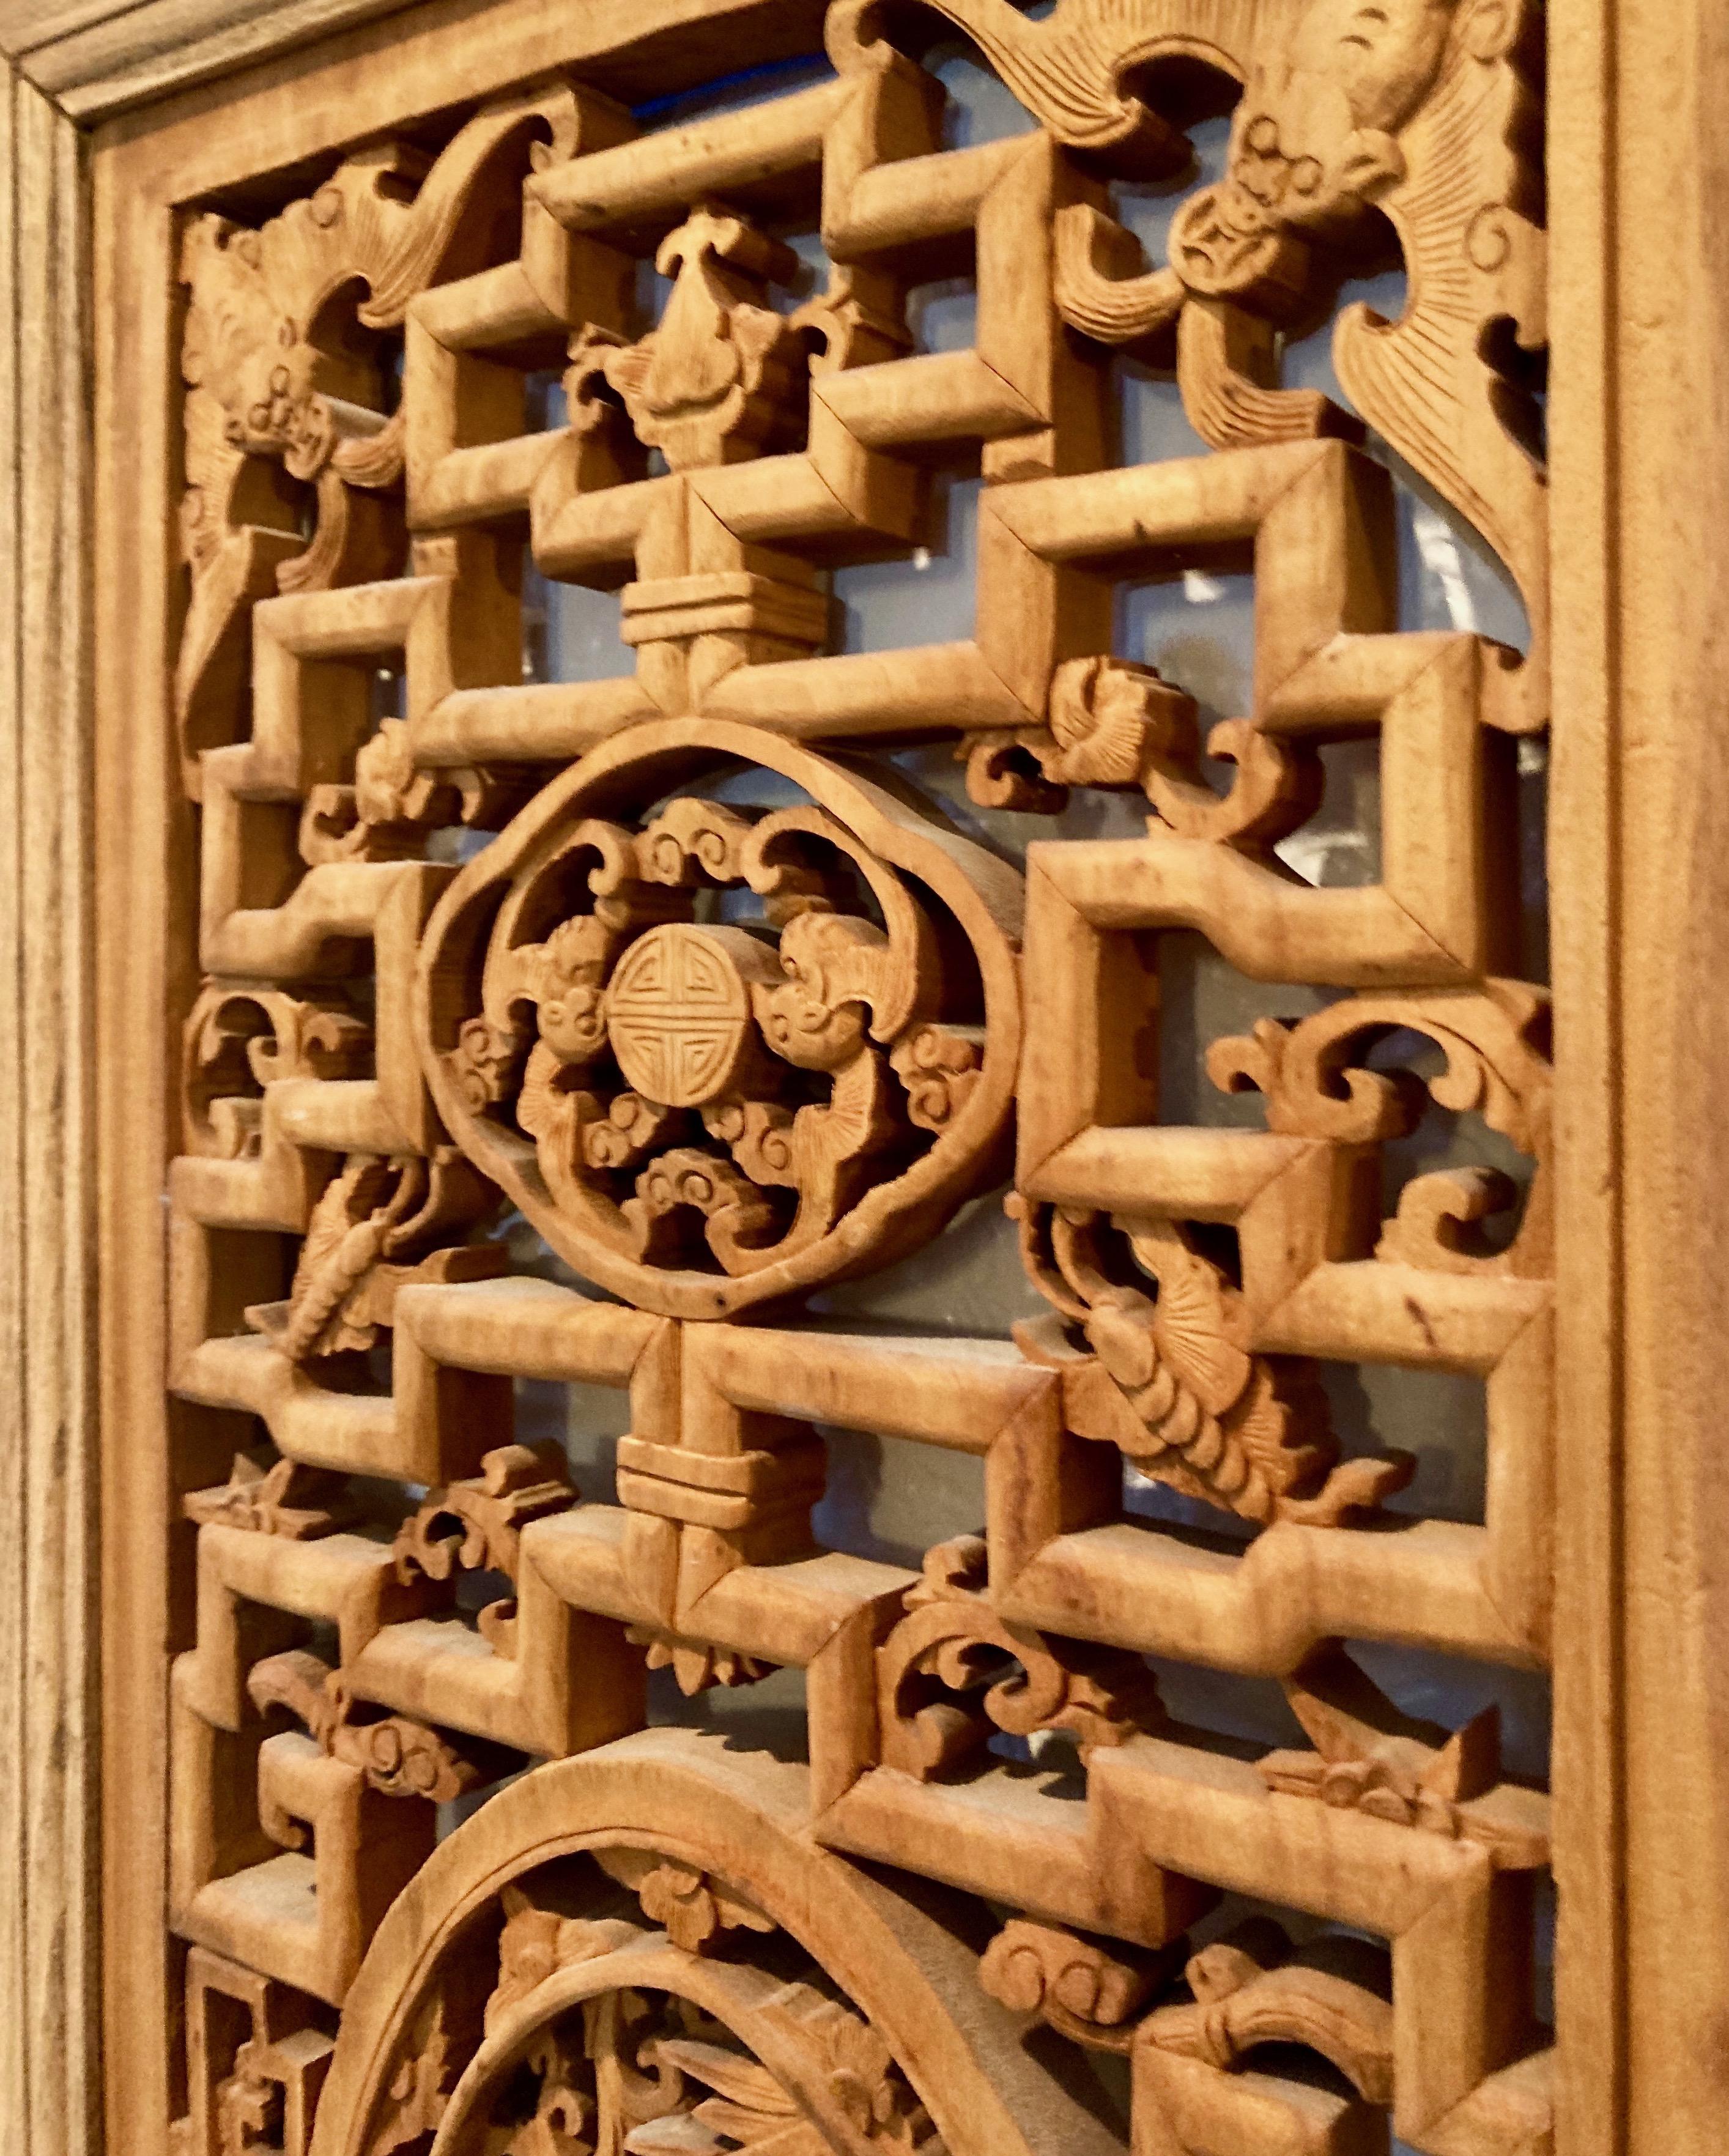 The intricate design in this framed panel includes an oval center carving with a bird and floral motif, and a surrounding bat motif.